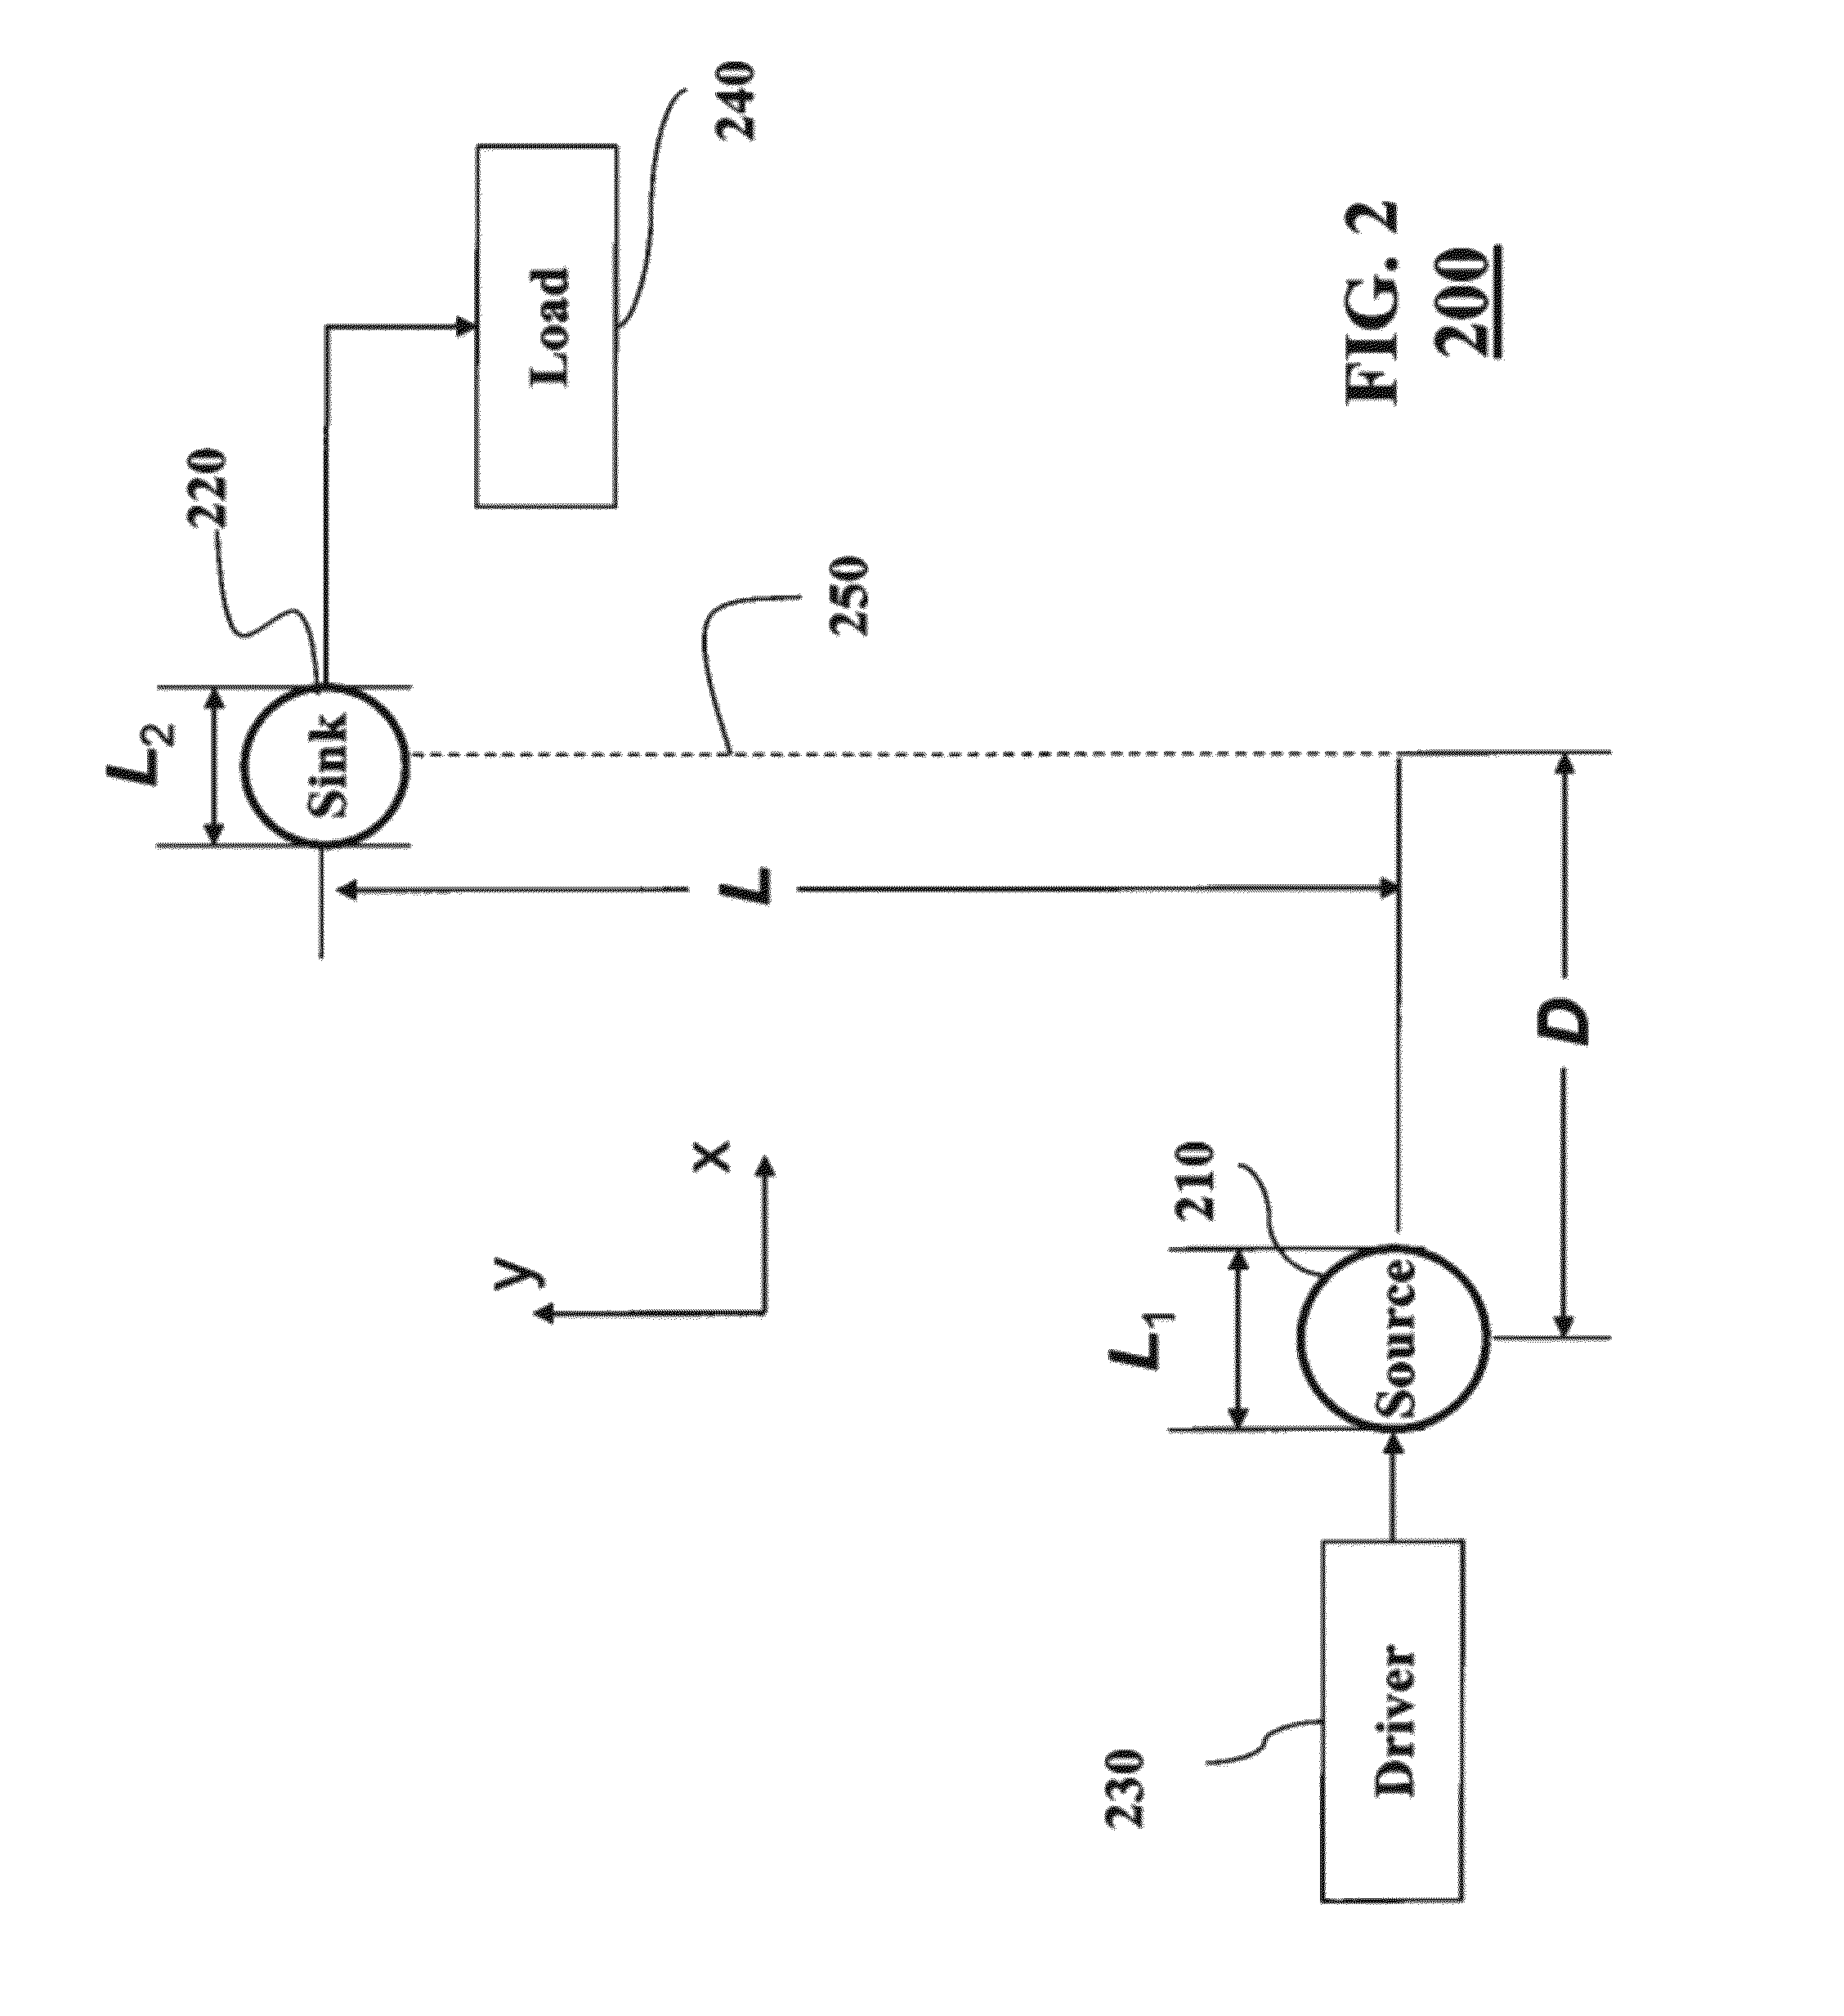 System and Method for Automatically Optimizing Wireless Power